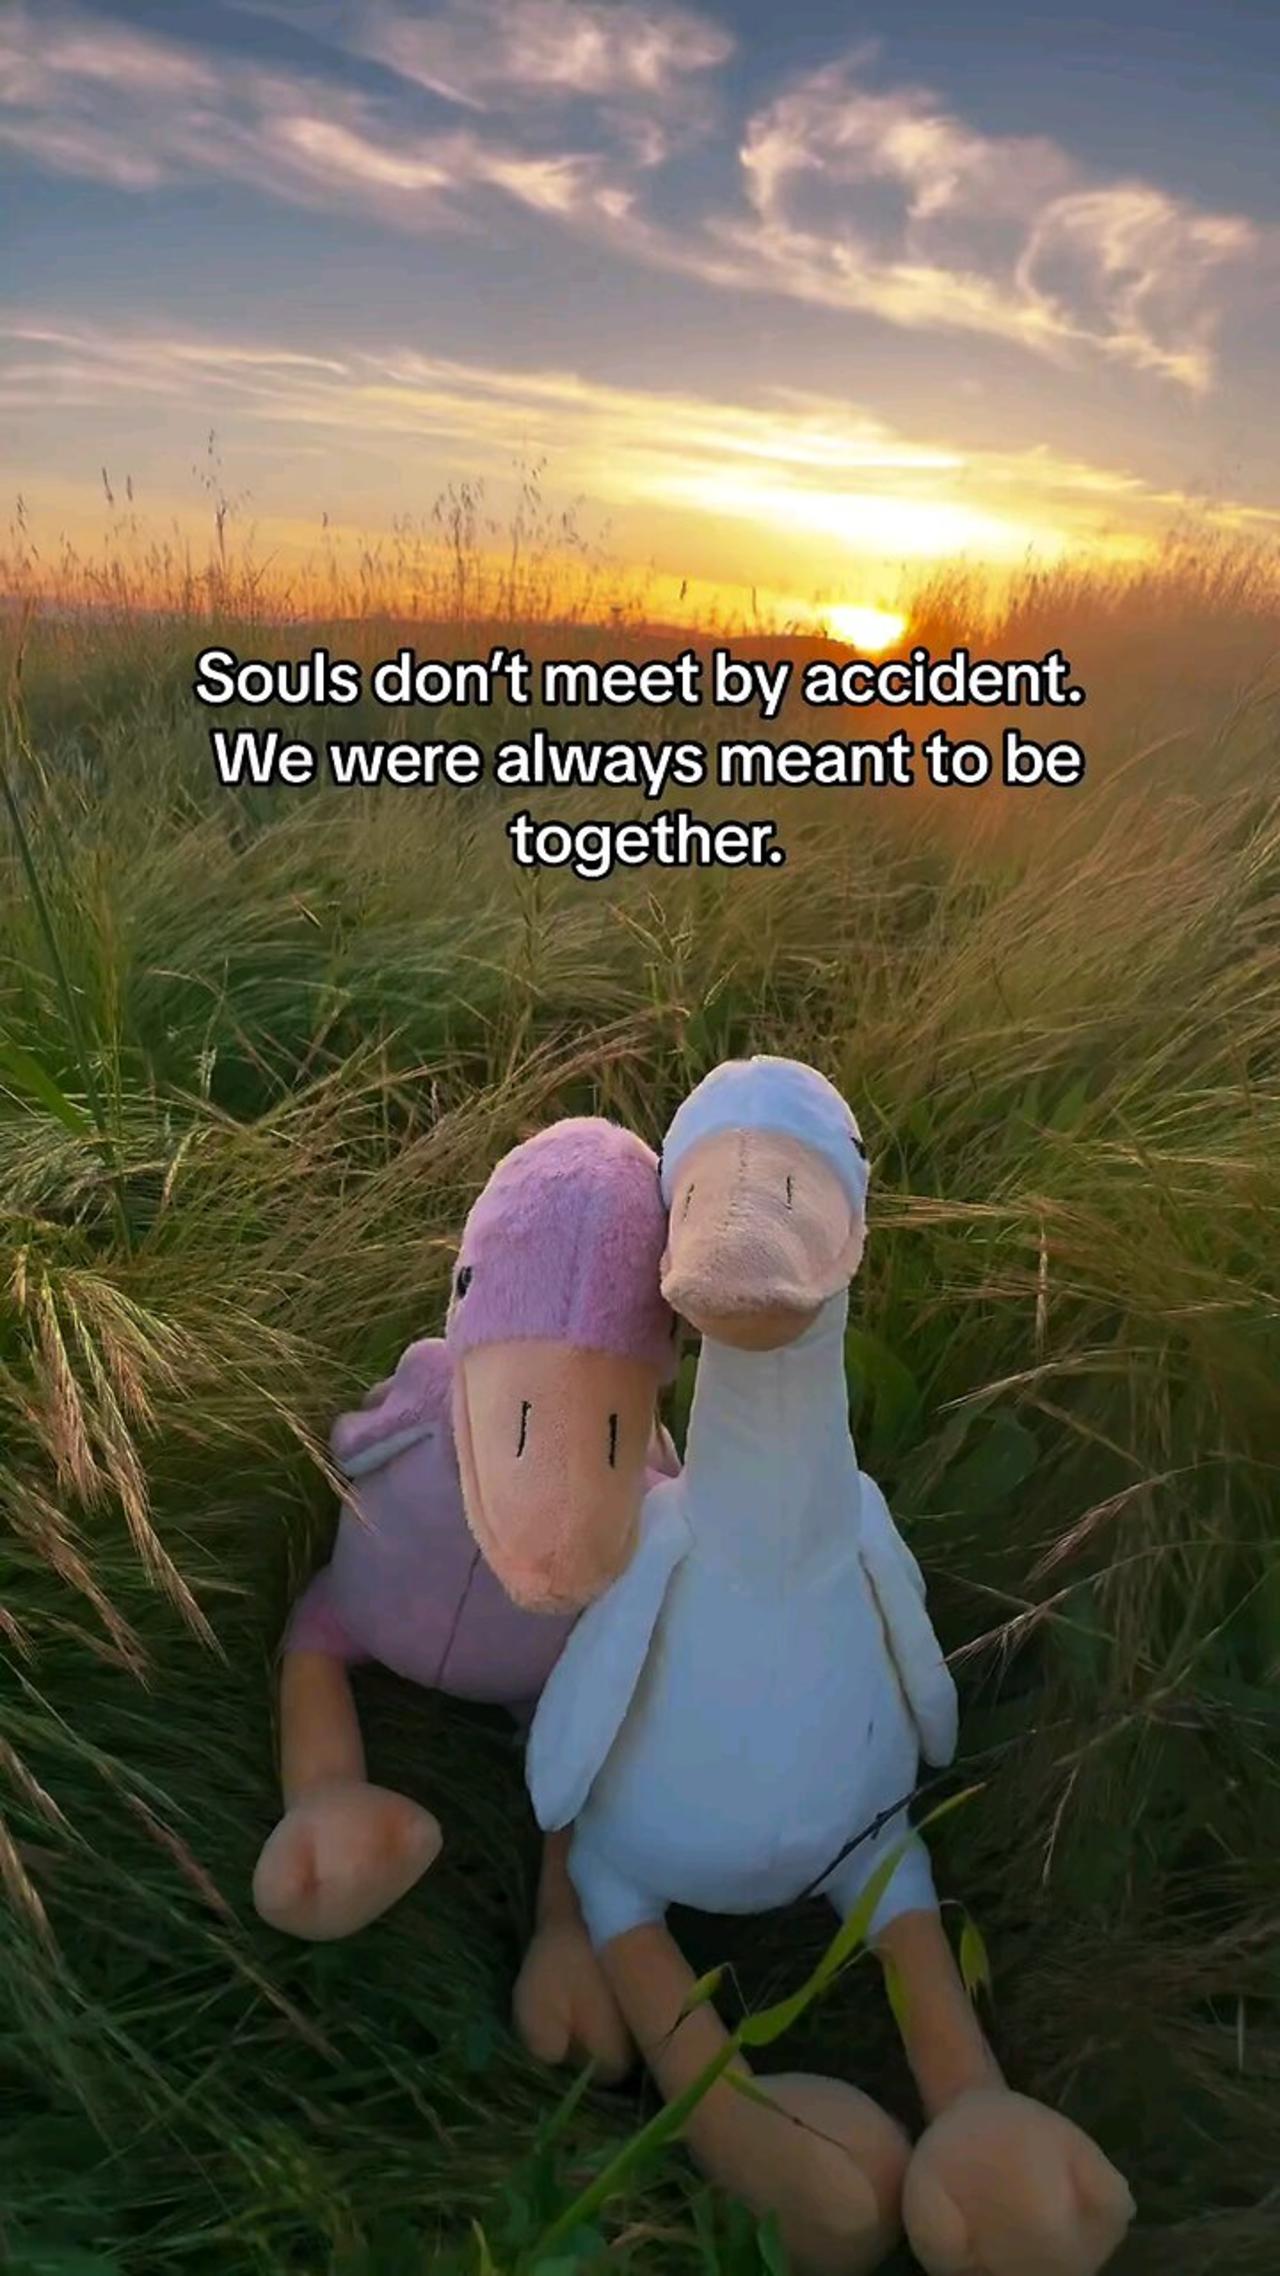 souls don’t meet by accident. we were always meant to be together.